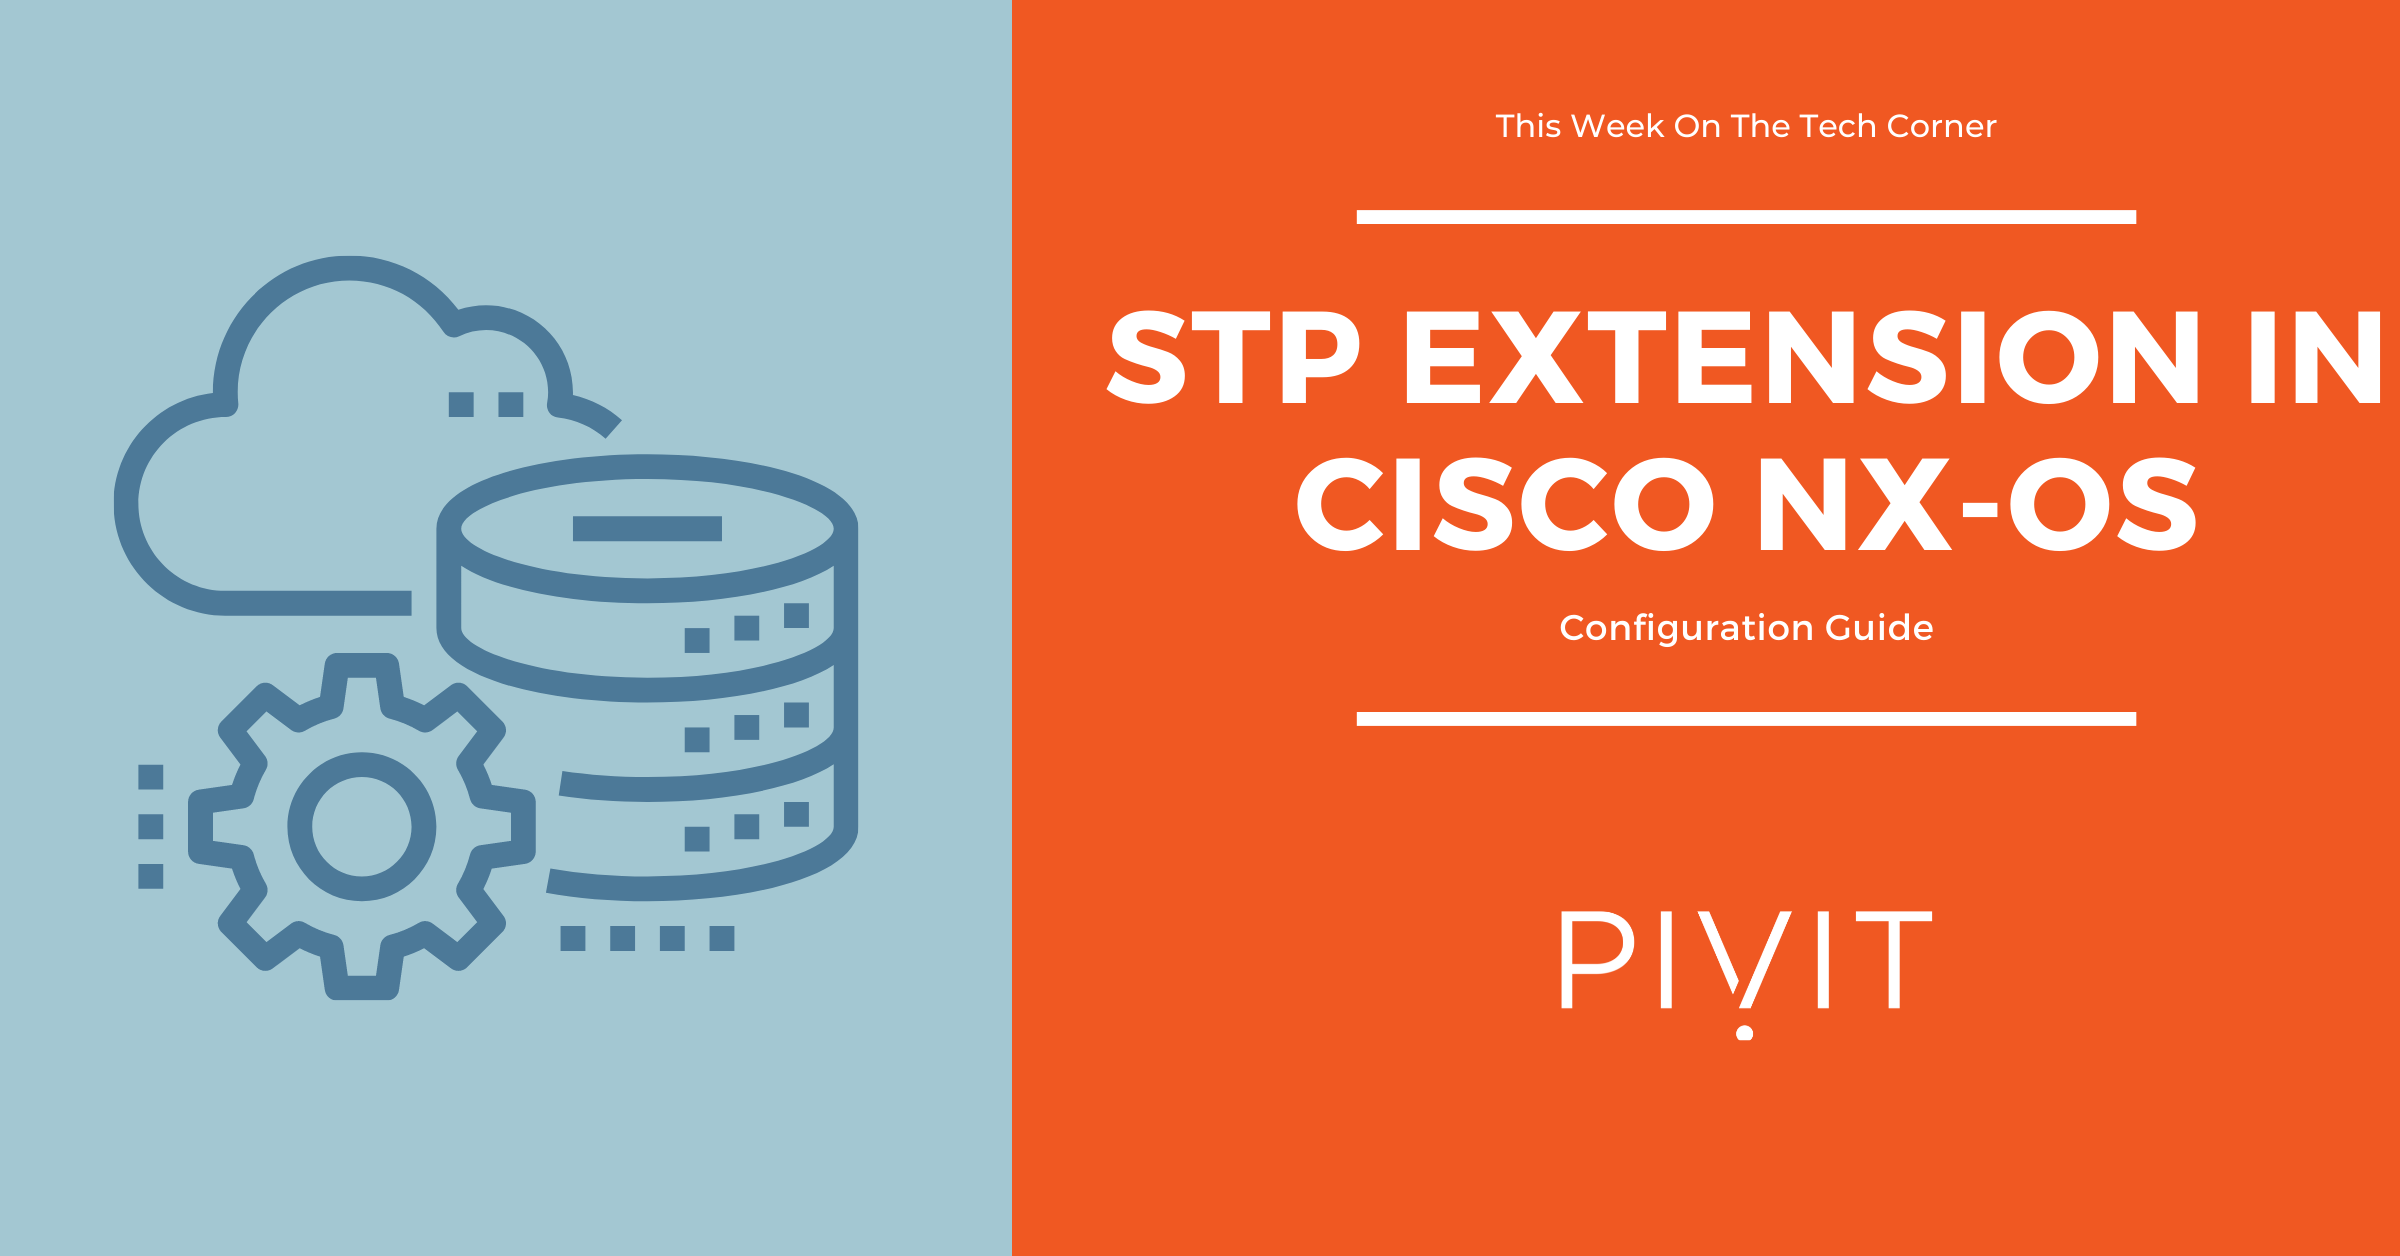 stp extension configuration guide in cisco nx-os